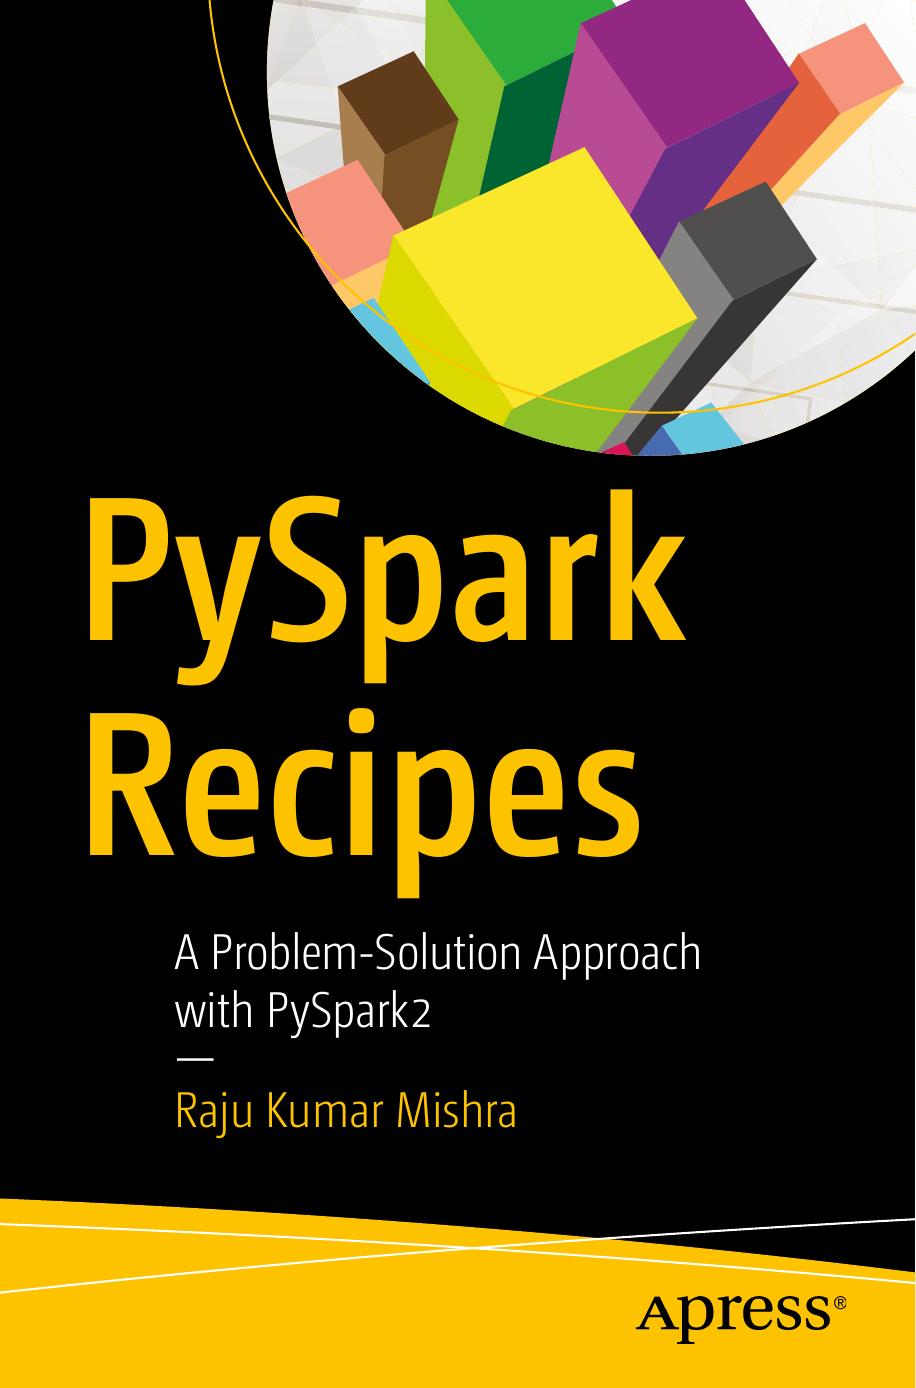 PySpark Recipes: A Problem-Solution Approach With PySpark2